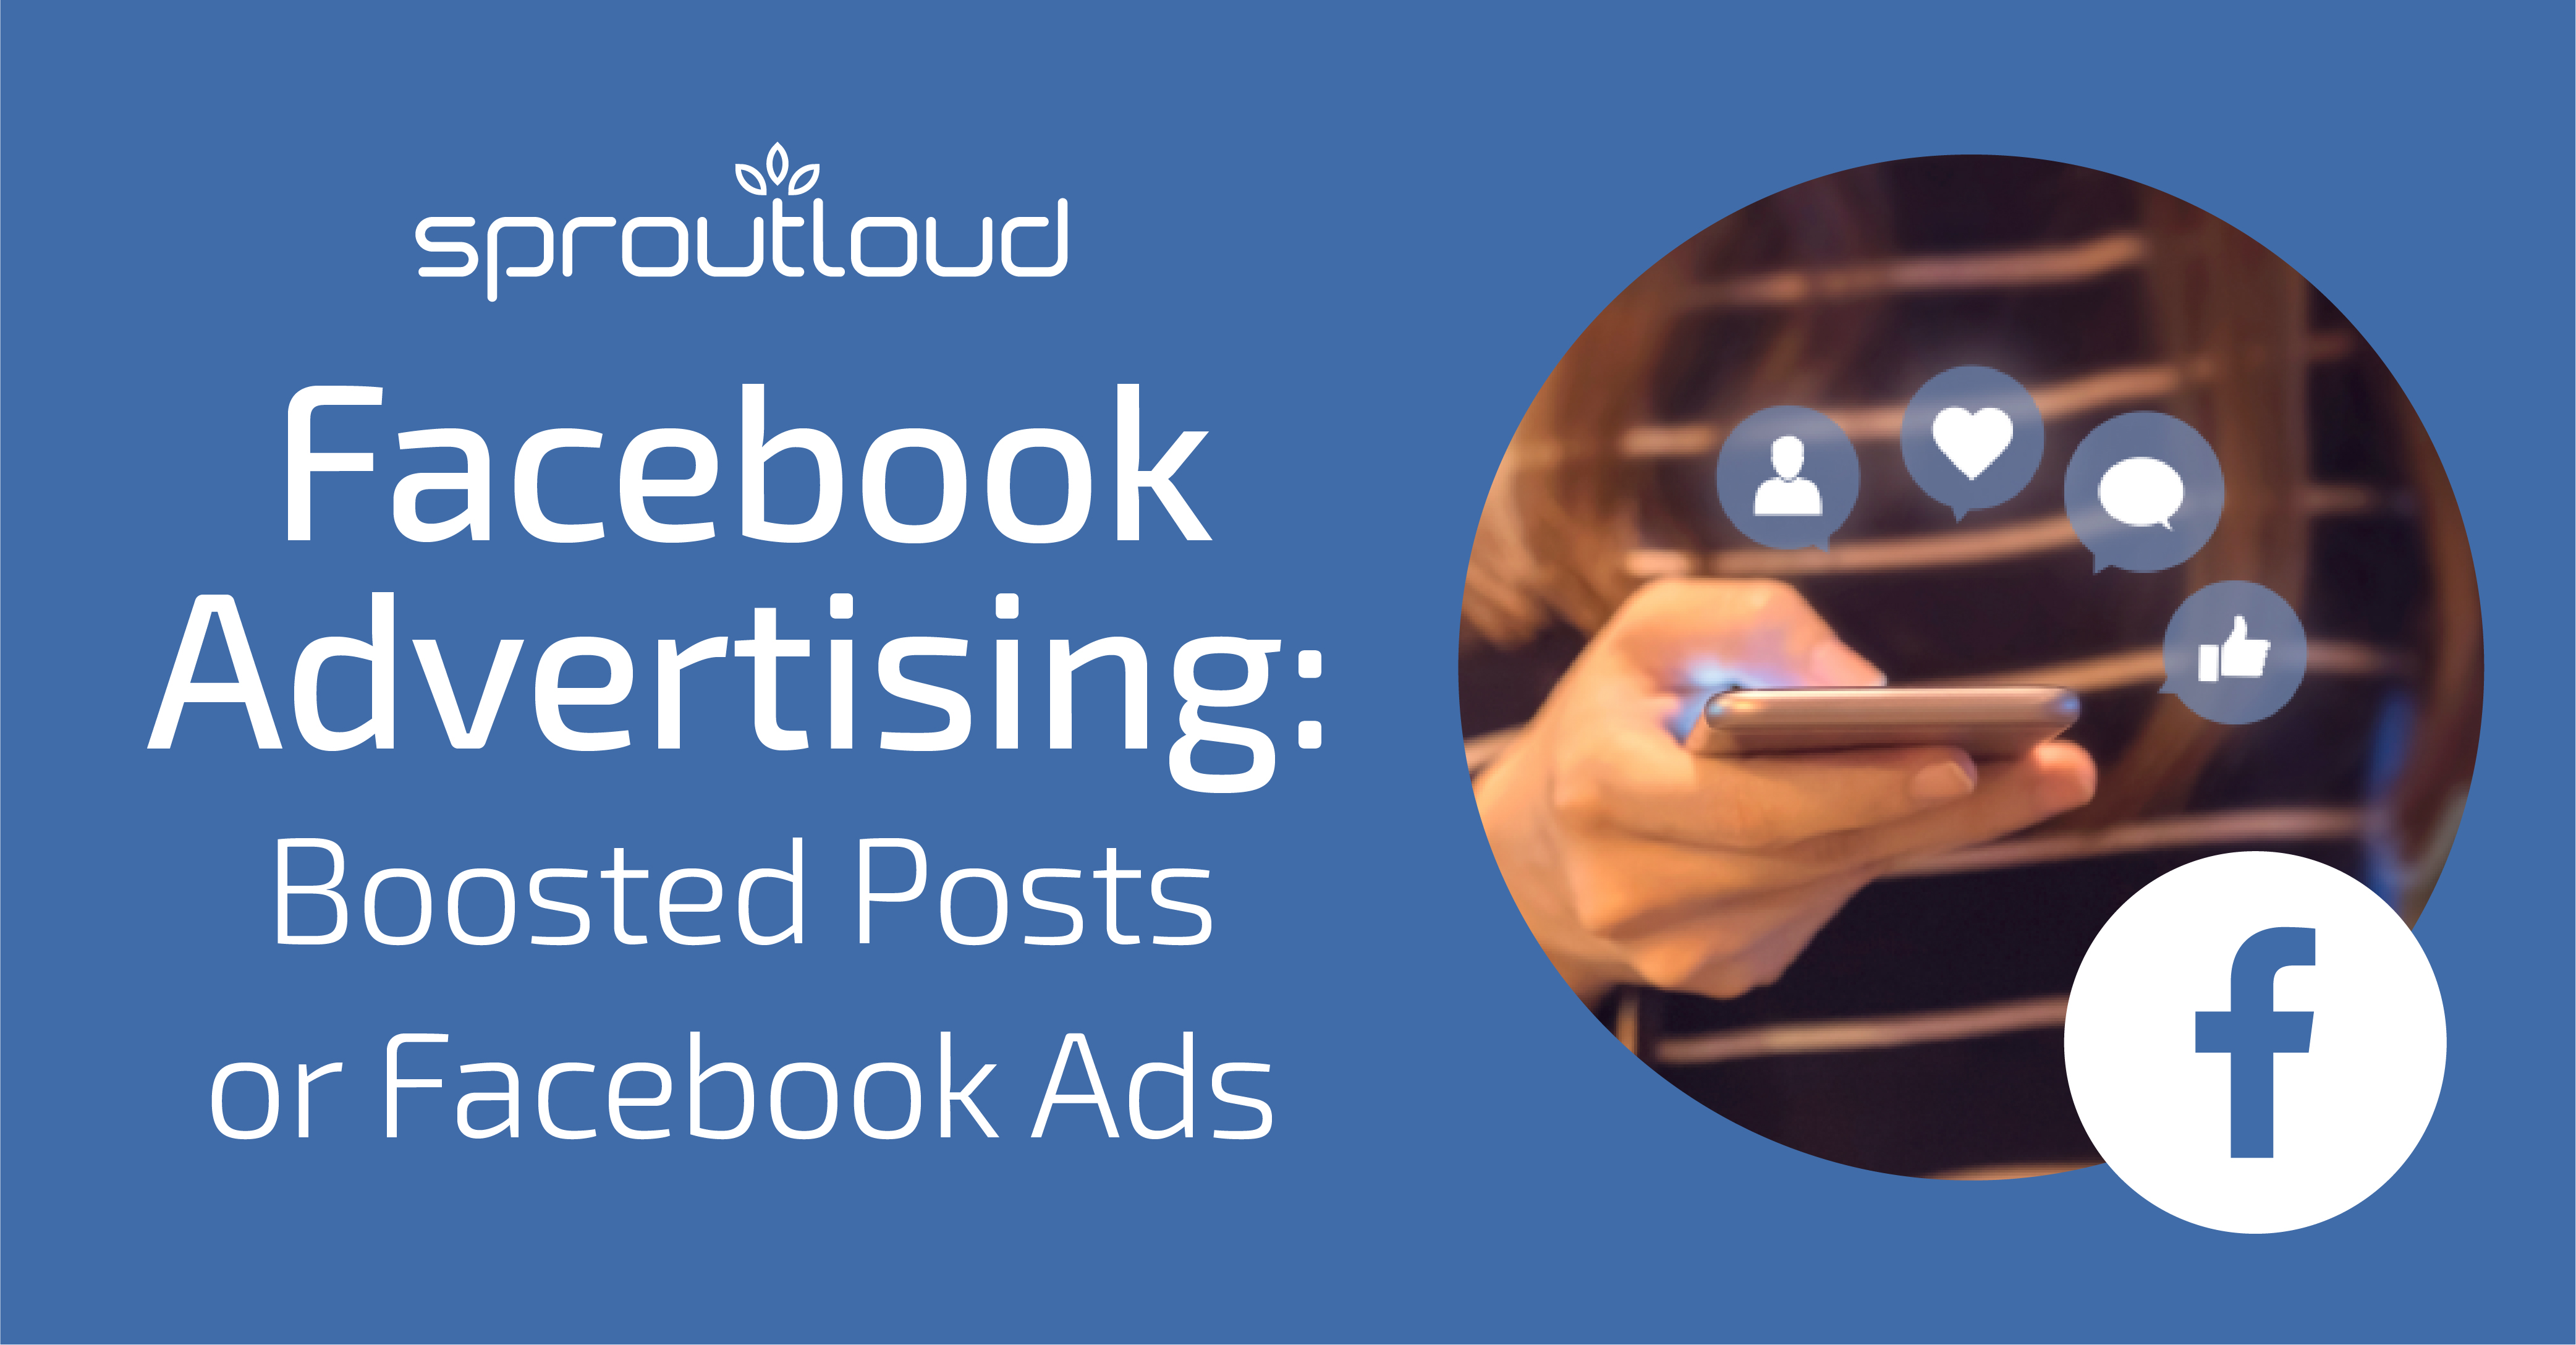 Facebook Advertising: Boosted Posts or Facebook Ads